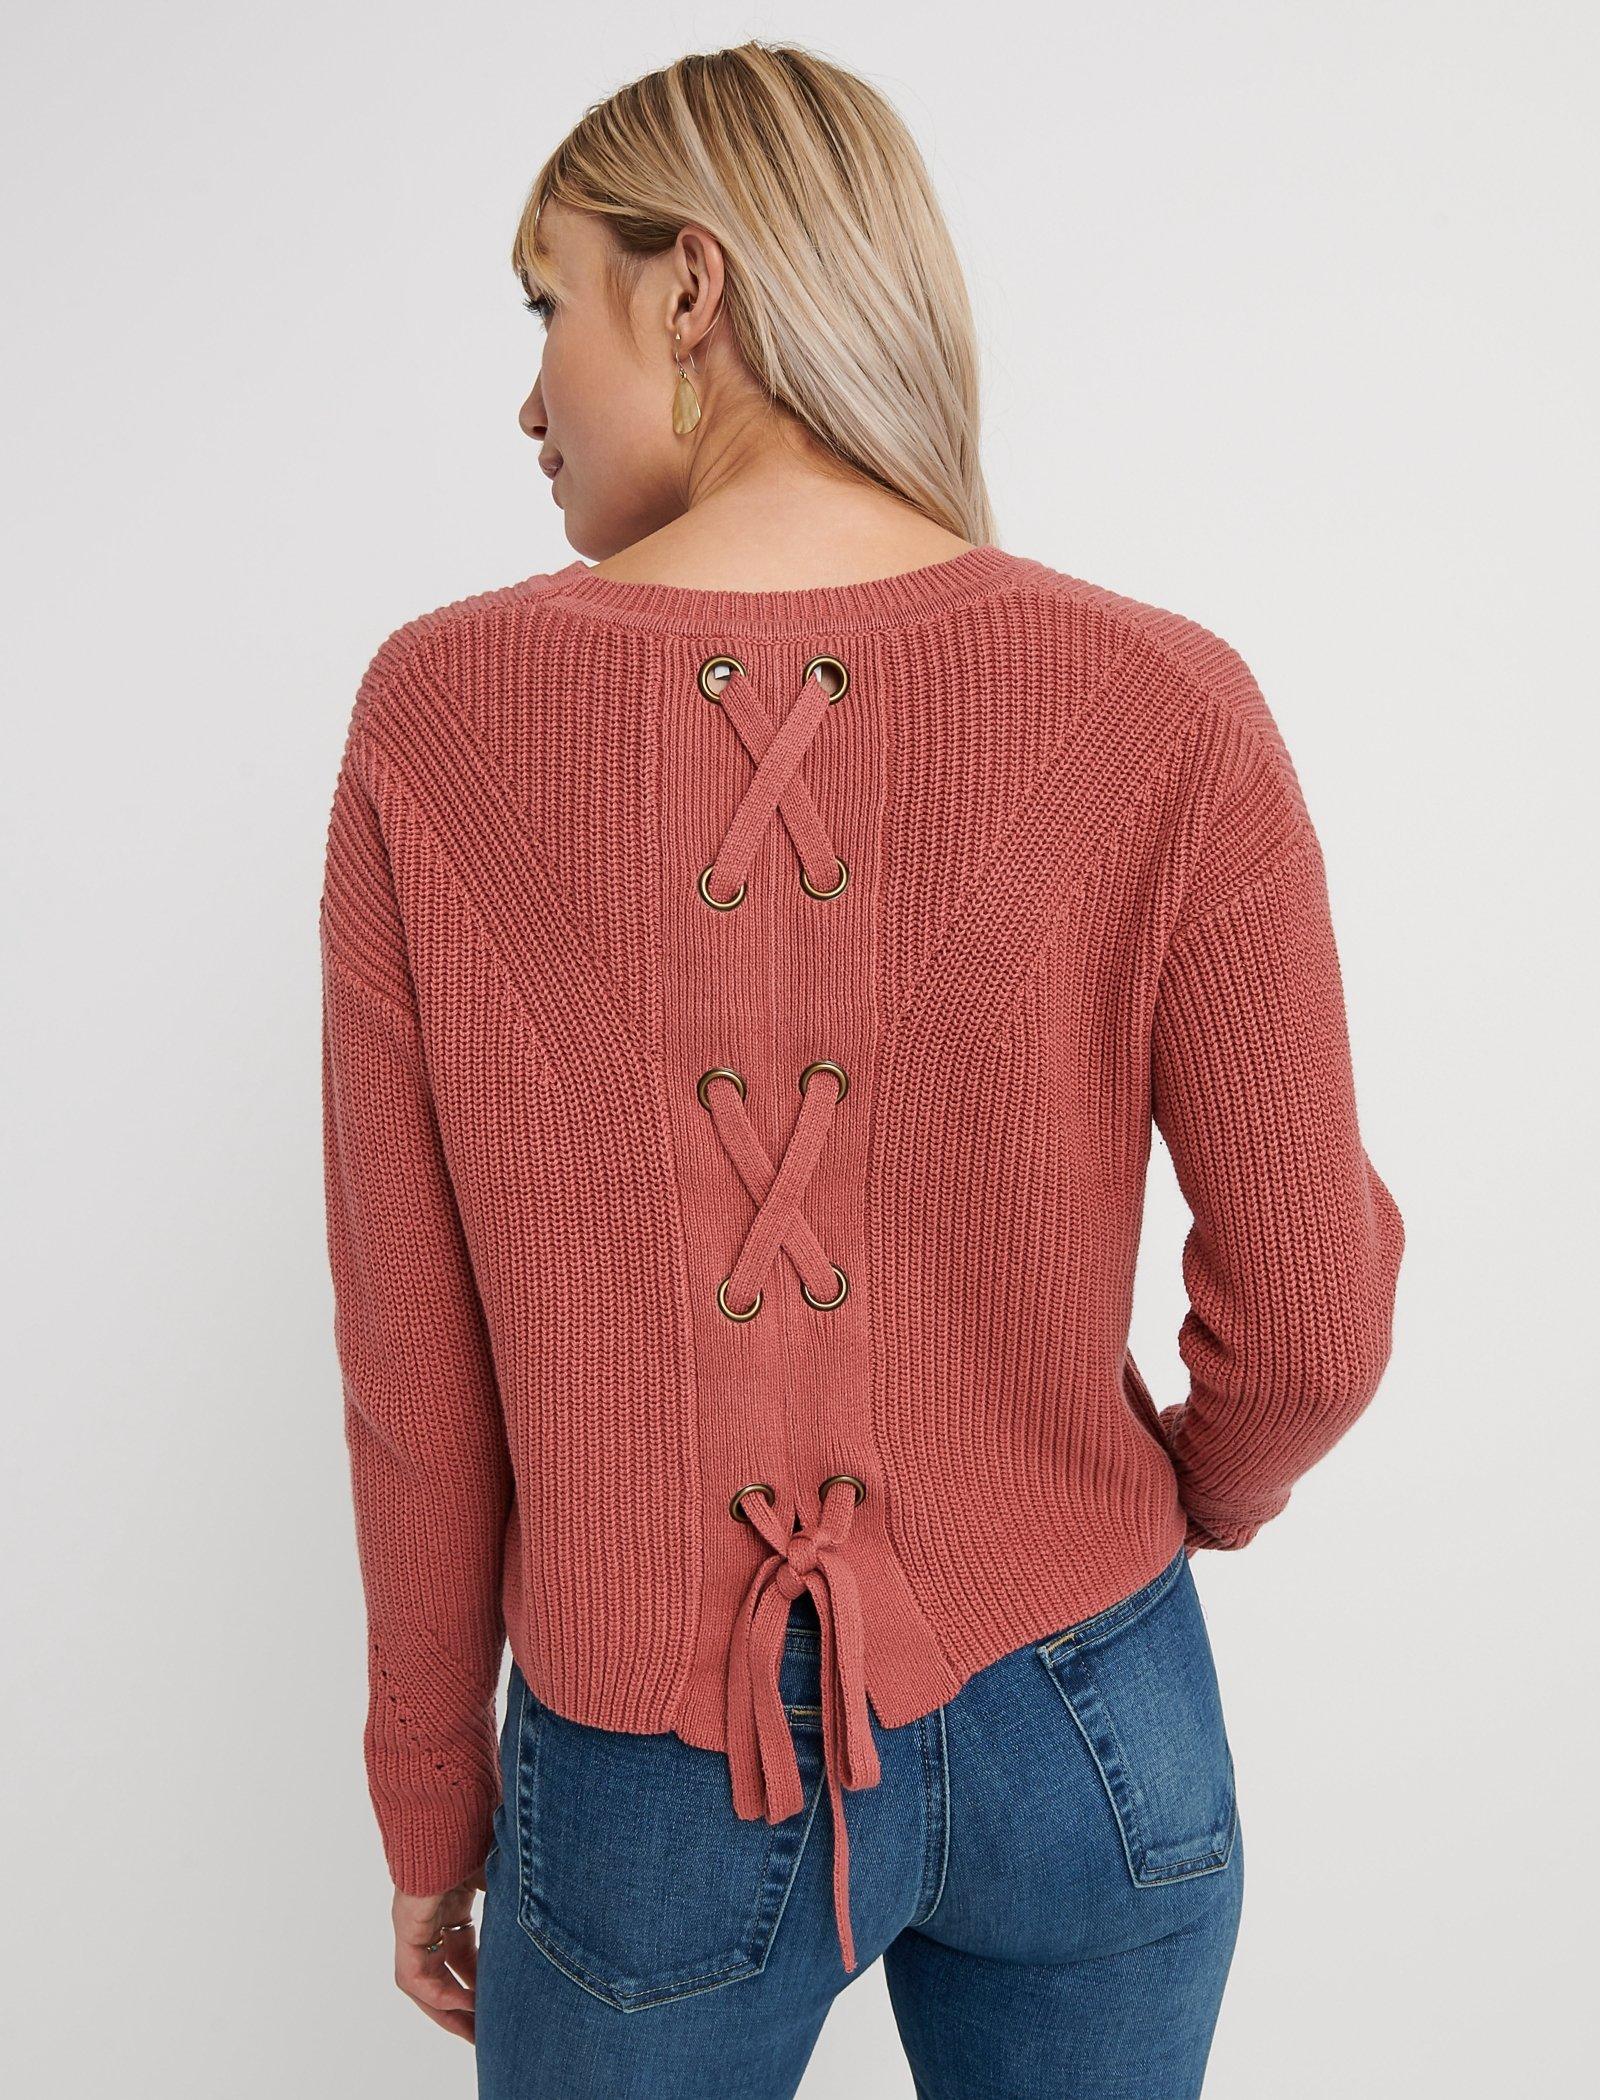 Lucky Brand Women's Omber Lace Up Pullover Sweater